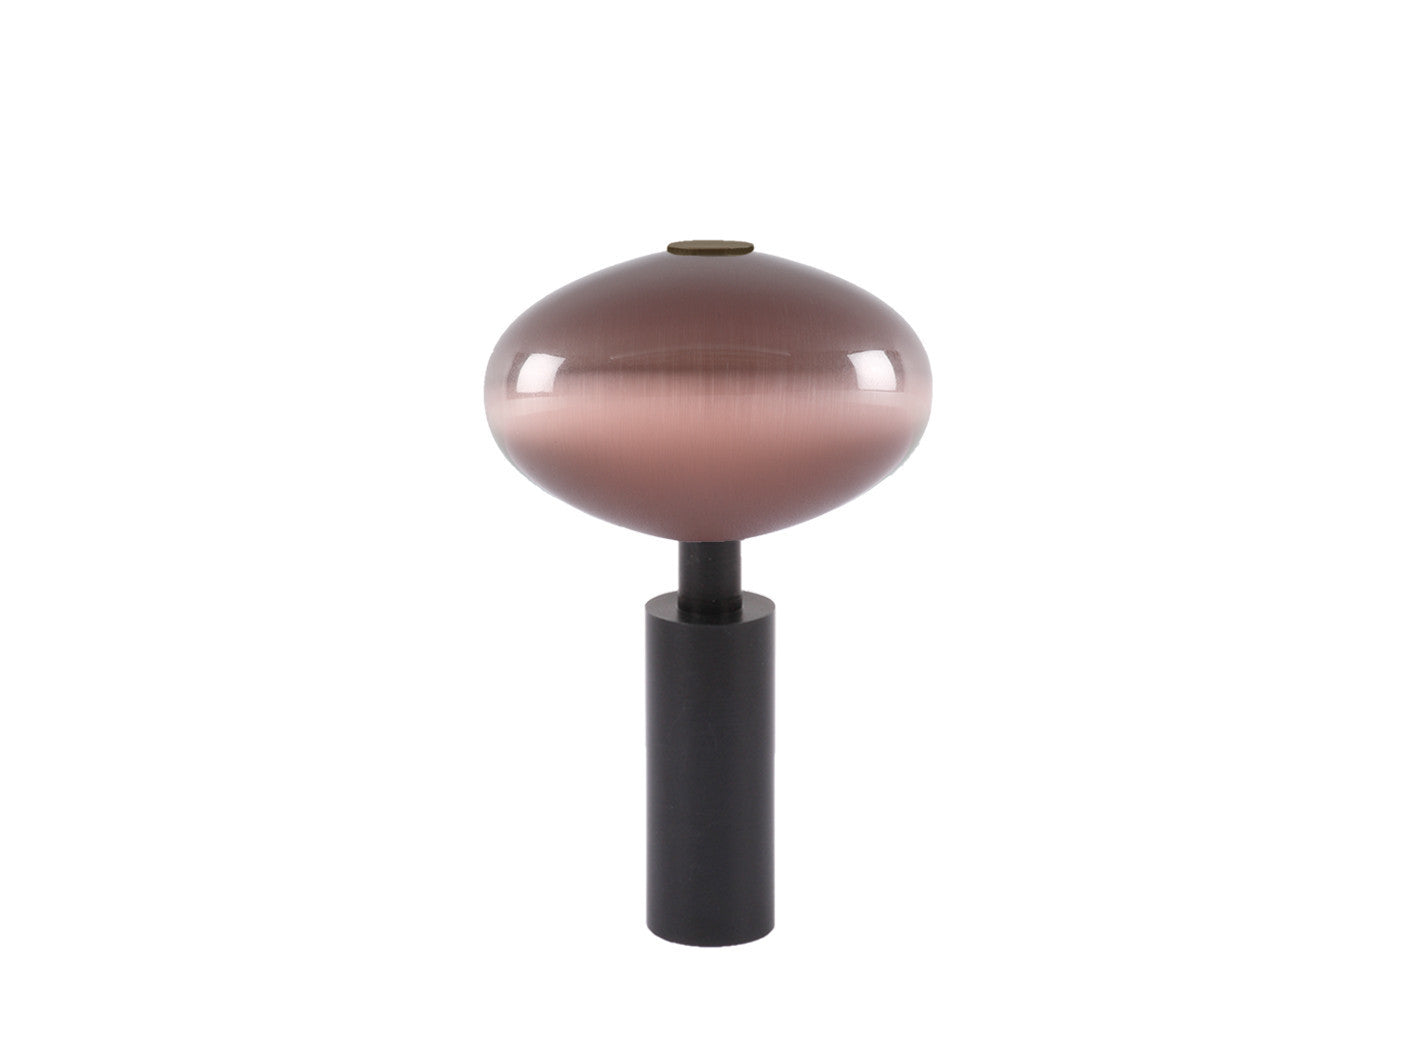 Glass moonstone finial in crocus pink | Walcot House 19mm collection